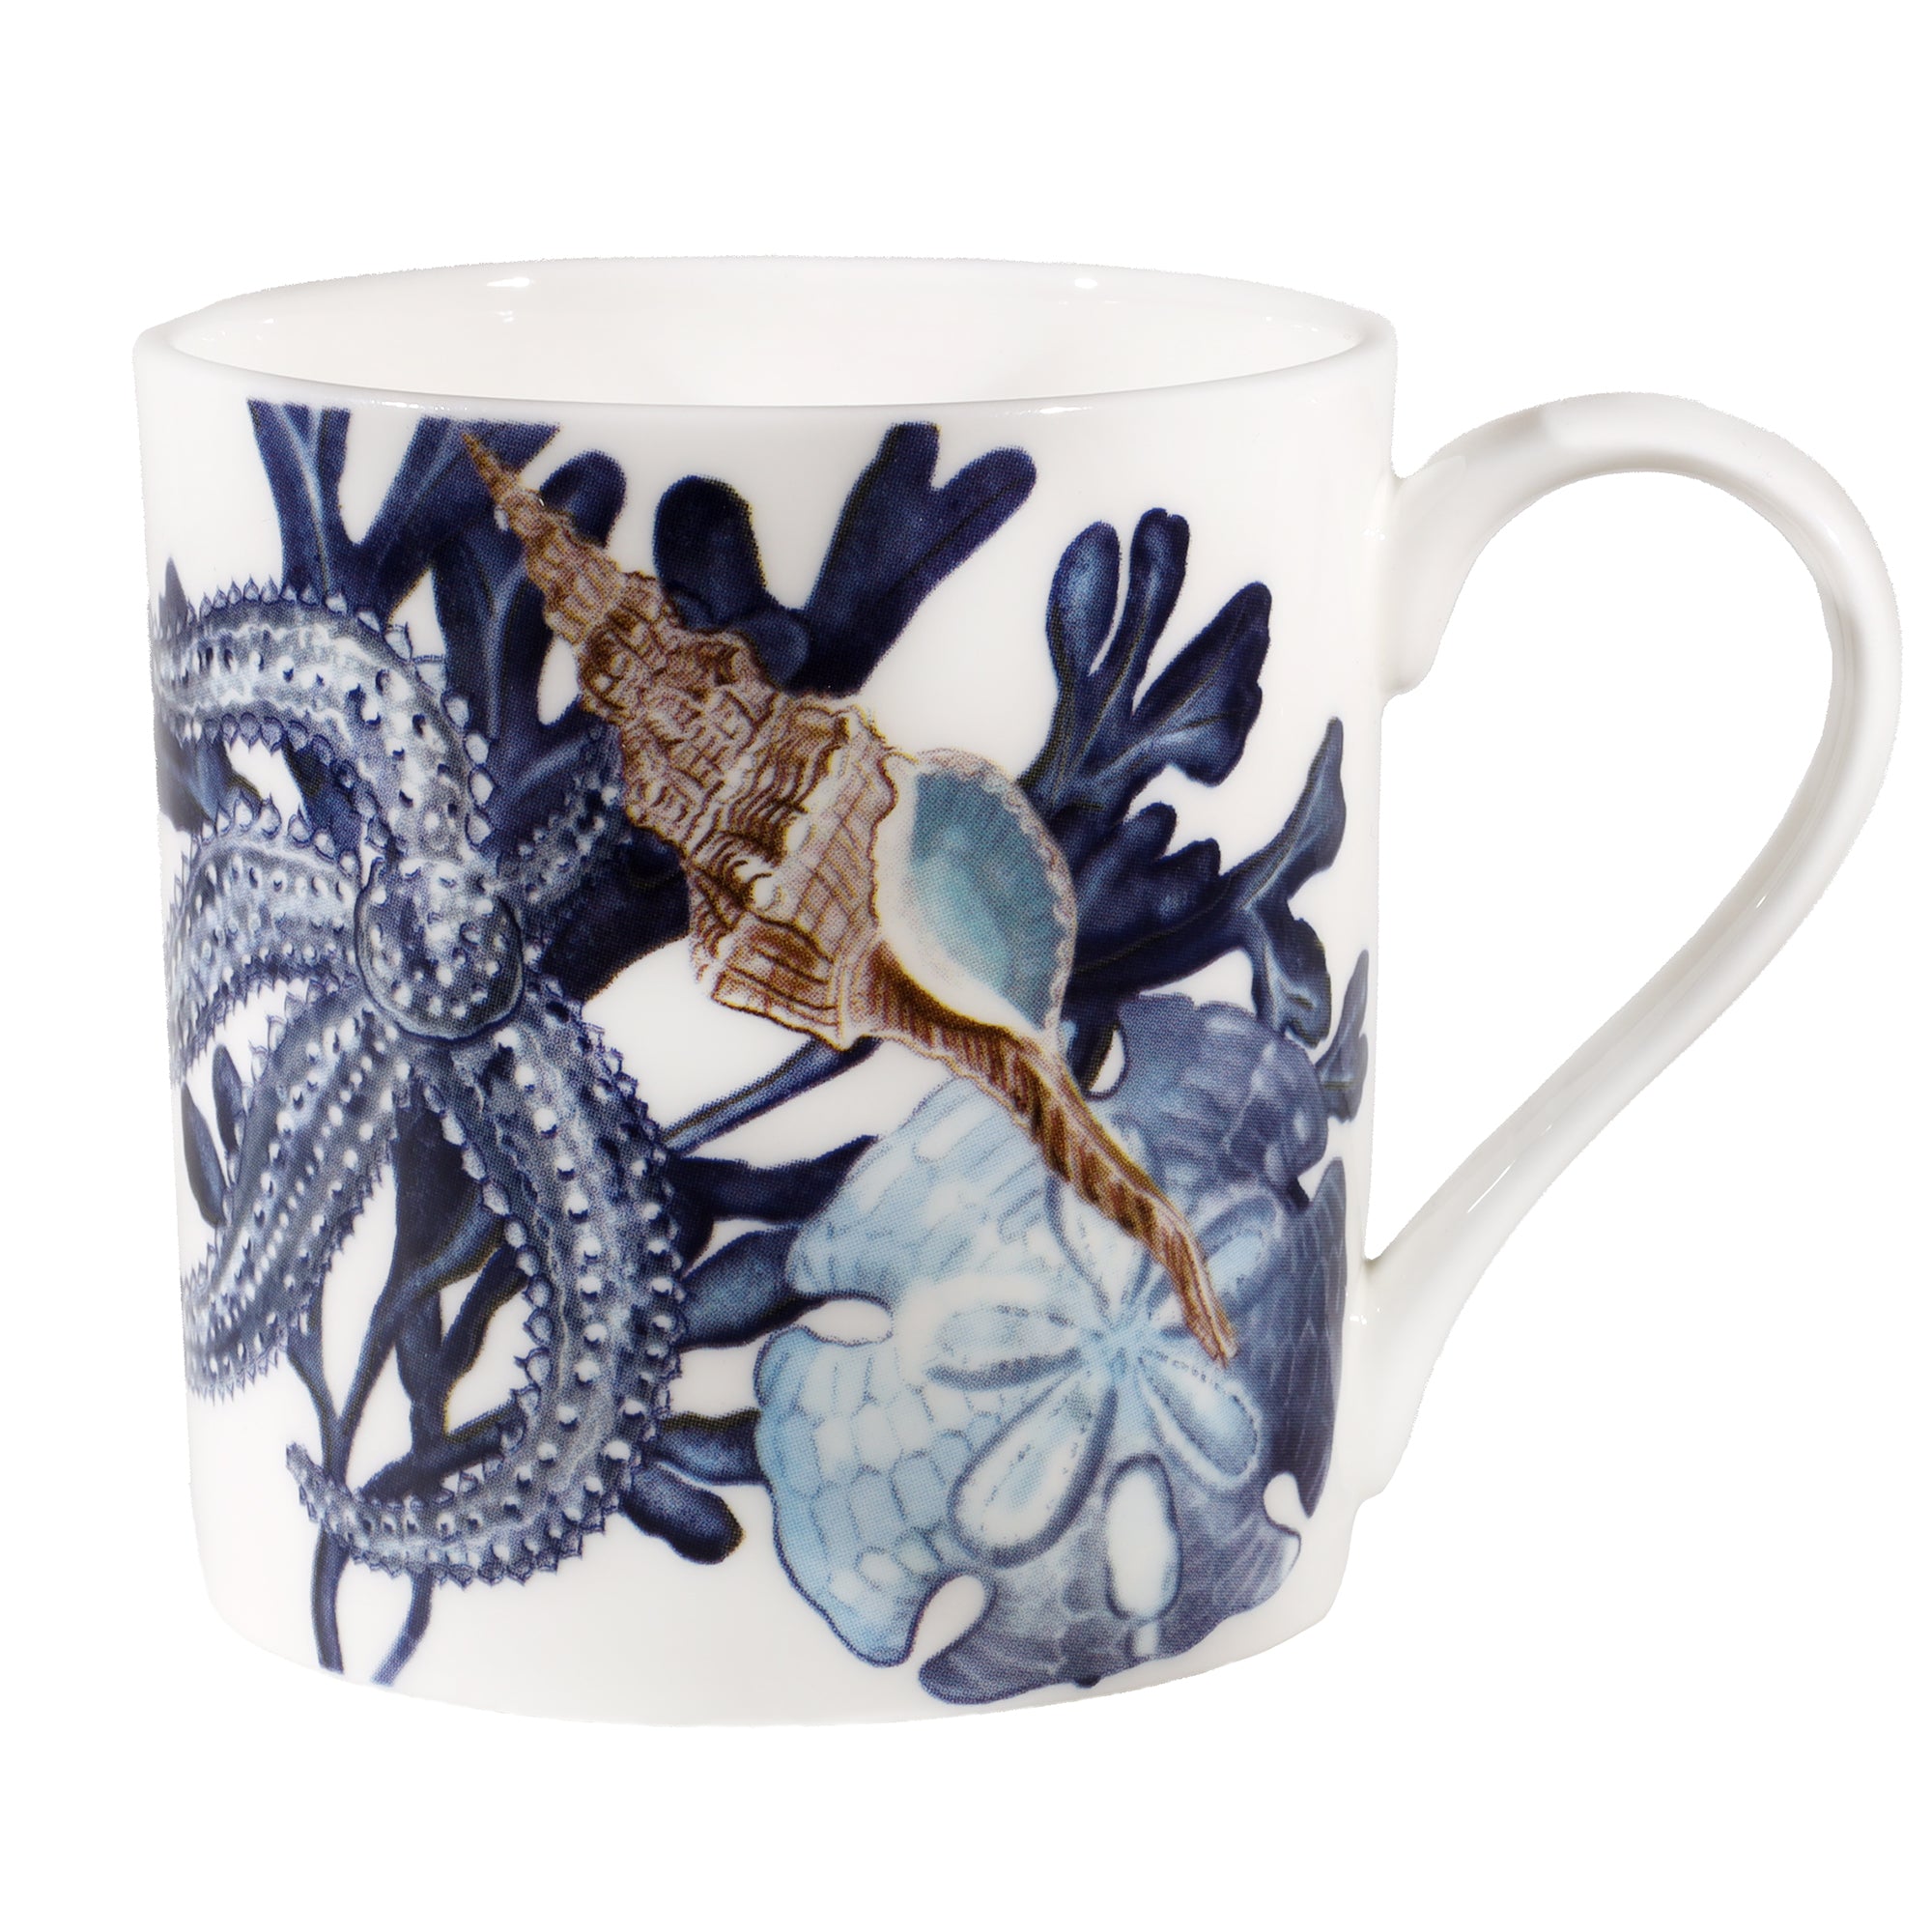 A cut out product shot on a white background of our beachcomber mug. This mug is covered in a selection of hand drawn blue seaweed, starfish, sand dollar and shells.